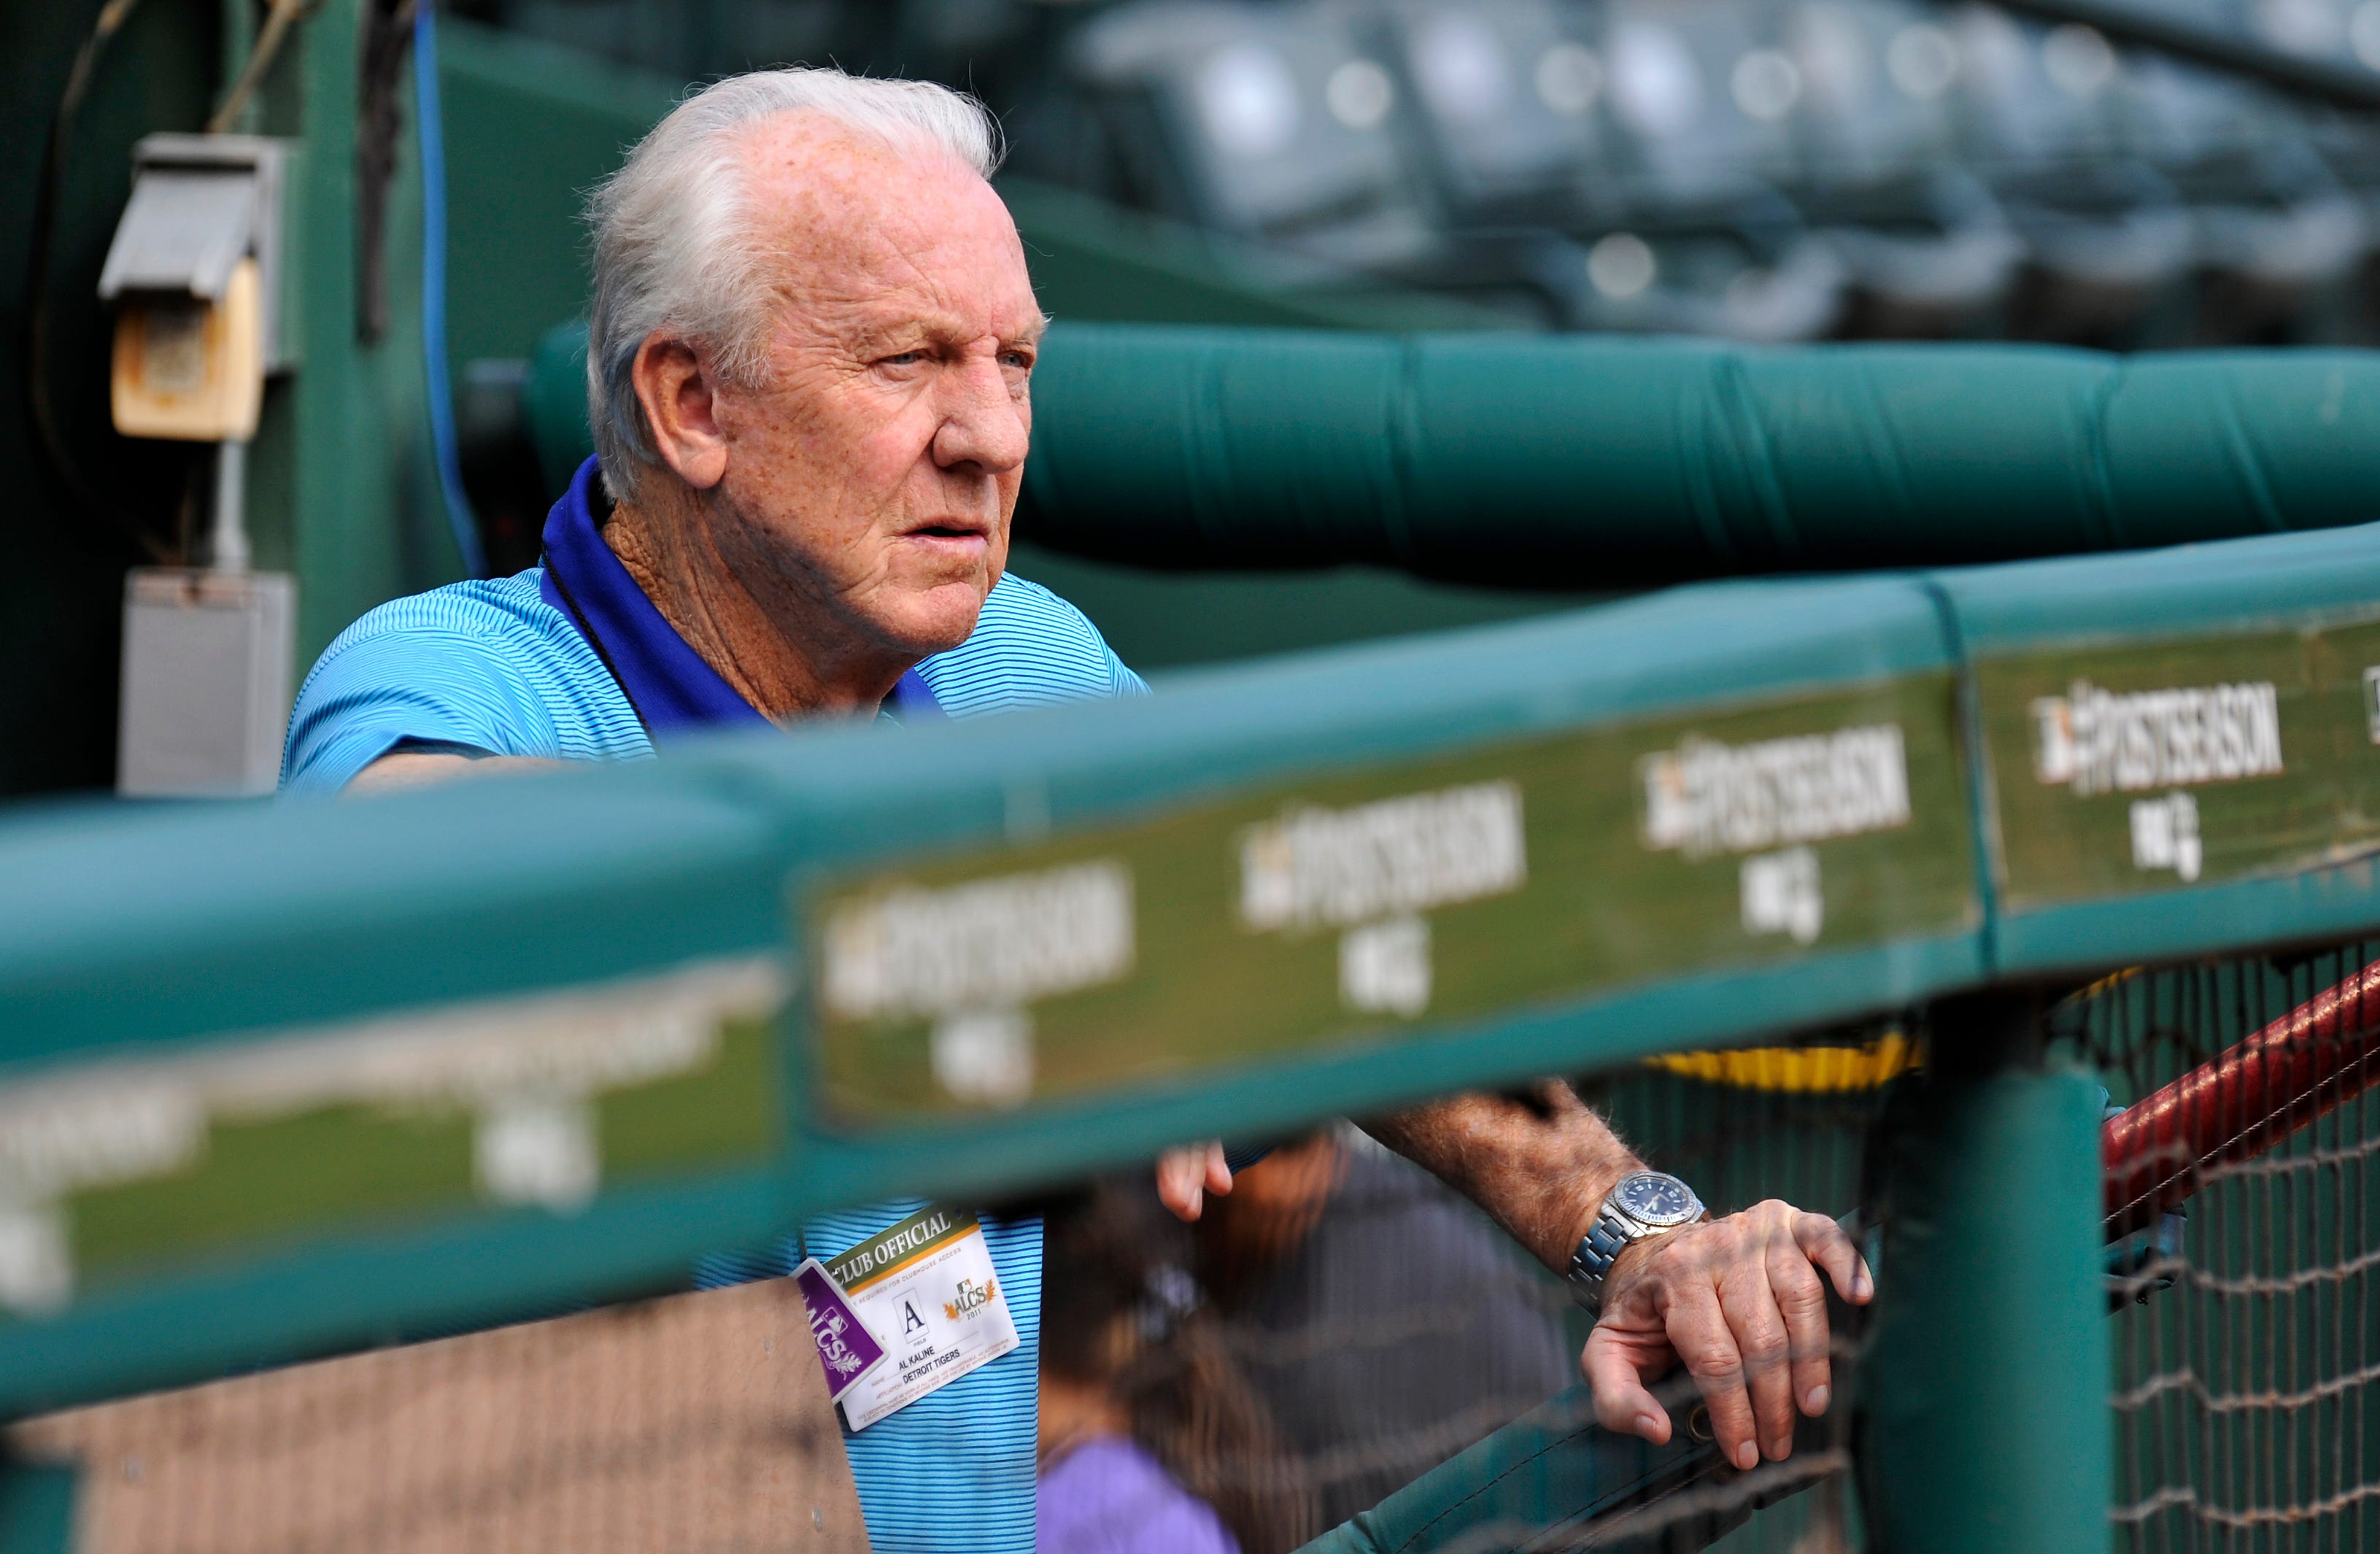 Detroit Tigers legend Al Kaline watches the end of the Texas Rangers workout from the visitors dugout at Rangers Ballpark in Arlington before Game One of the American League Championship Series on Friday, October 7, 2011.